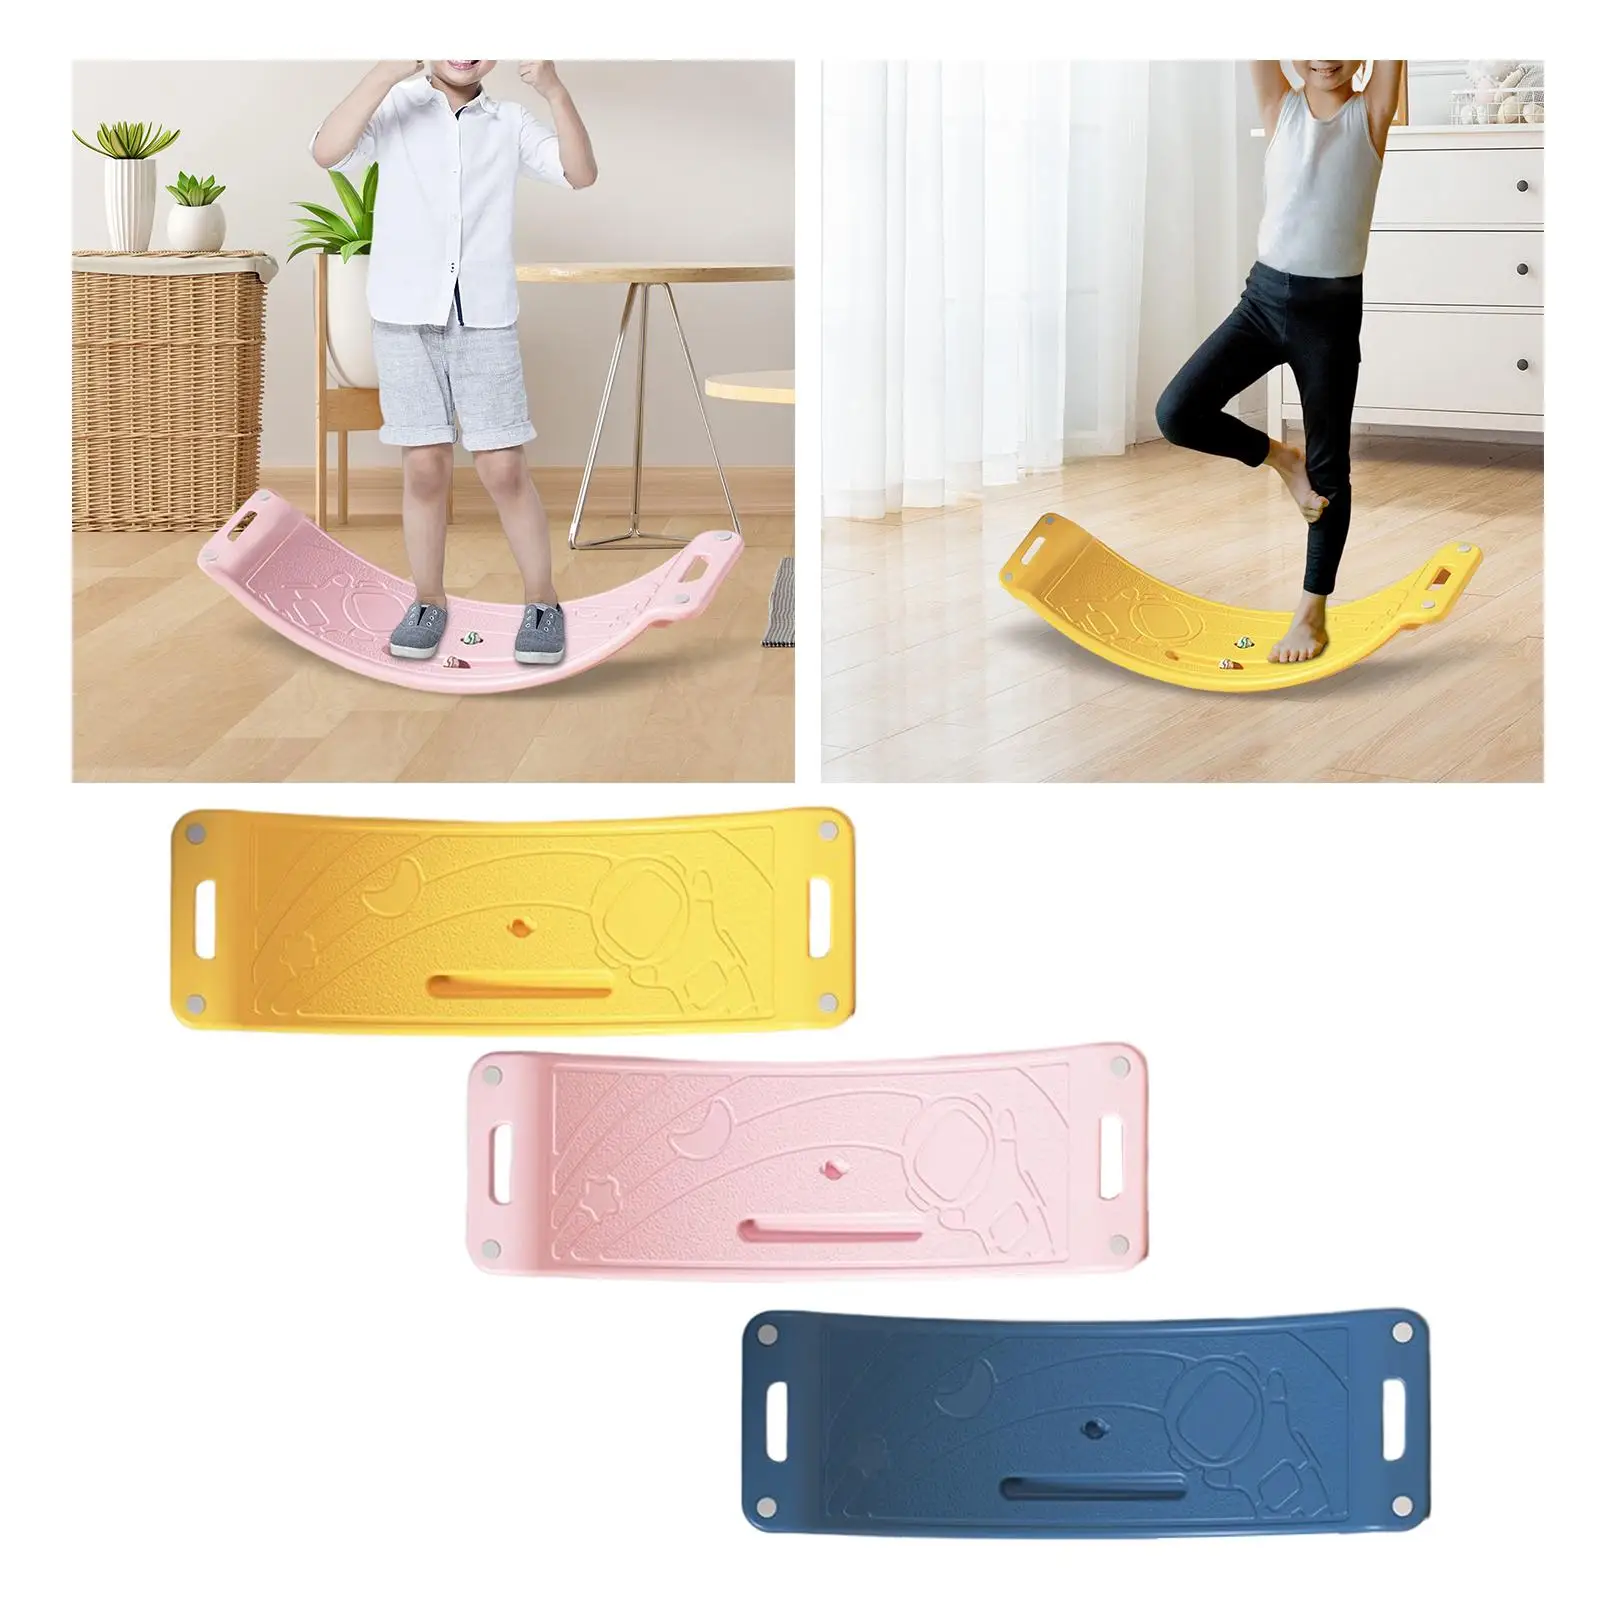 Professional Balance Board Curved Rocker Board Stability for Training Fitness Accessory